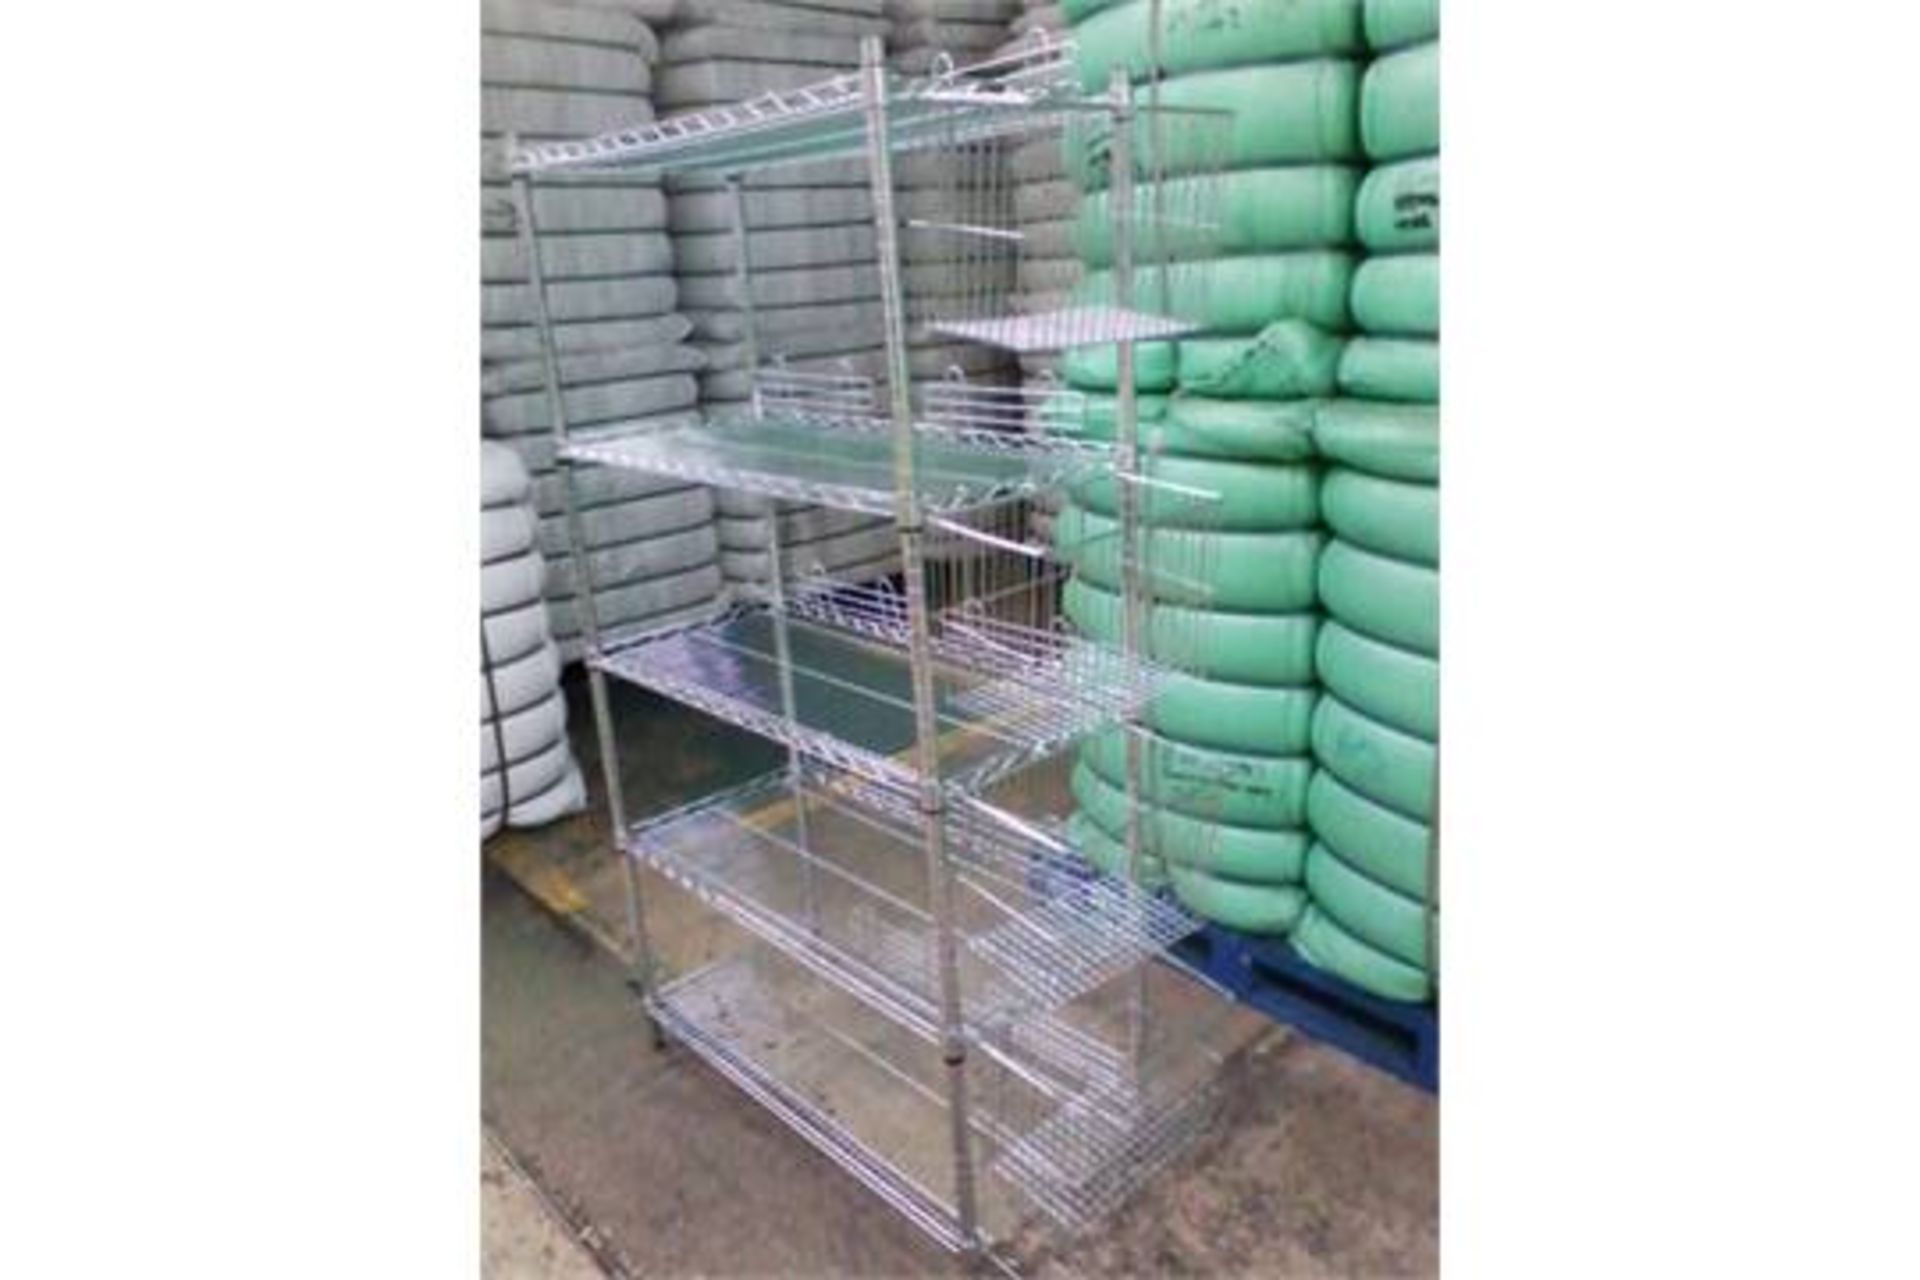 Catering Grade Chrome Finish Wire Mesh Shelving Unit - Image 2 of 4